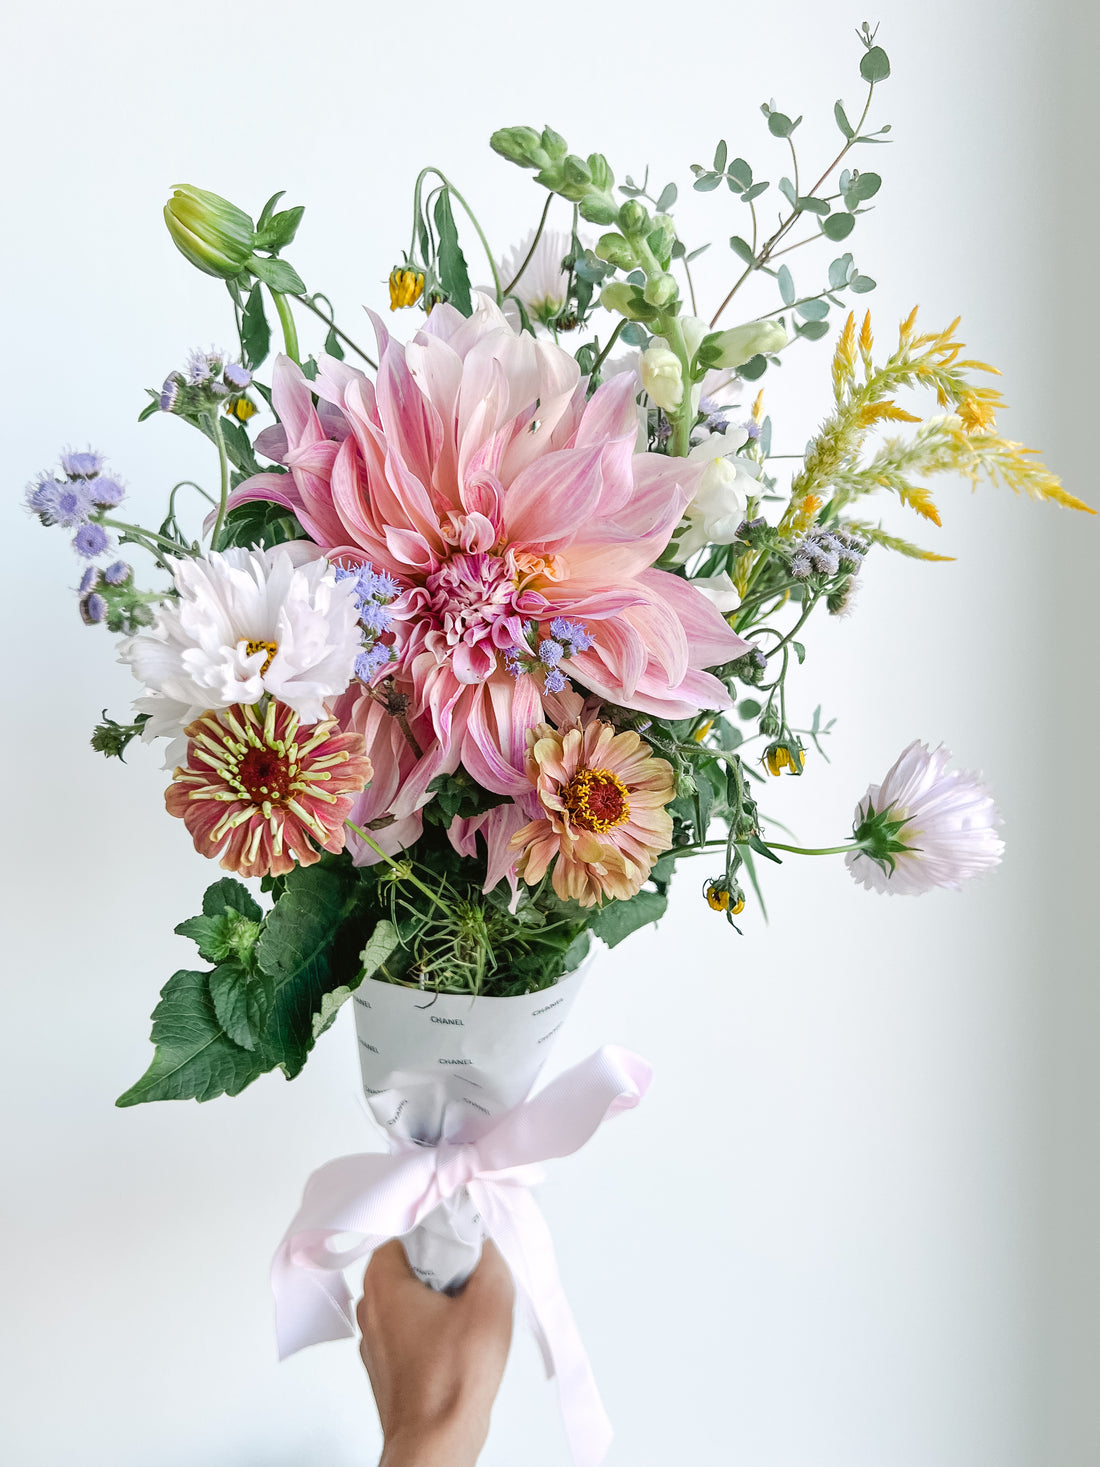 Floral Diary: This Weeks Flower Share